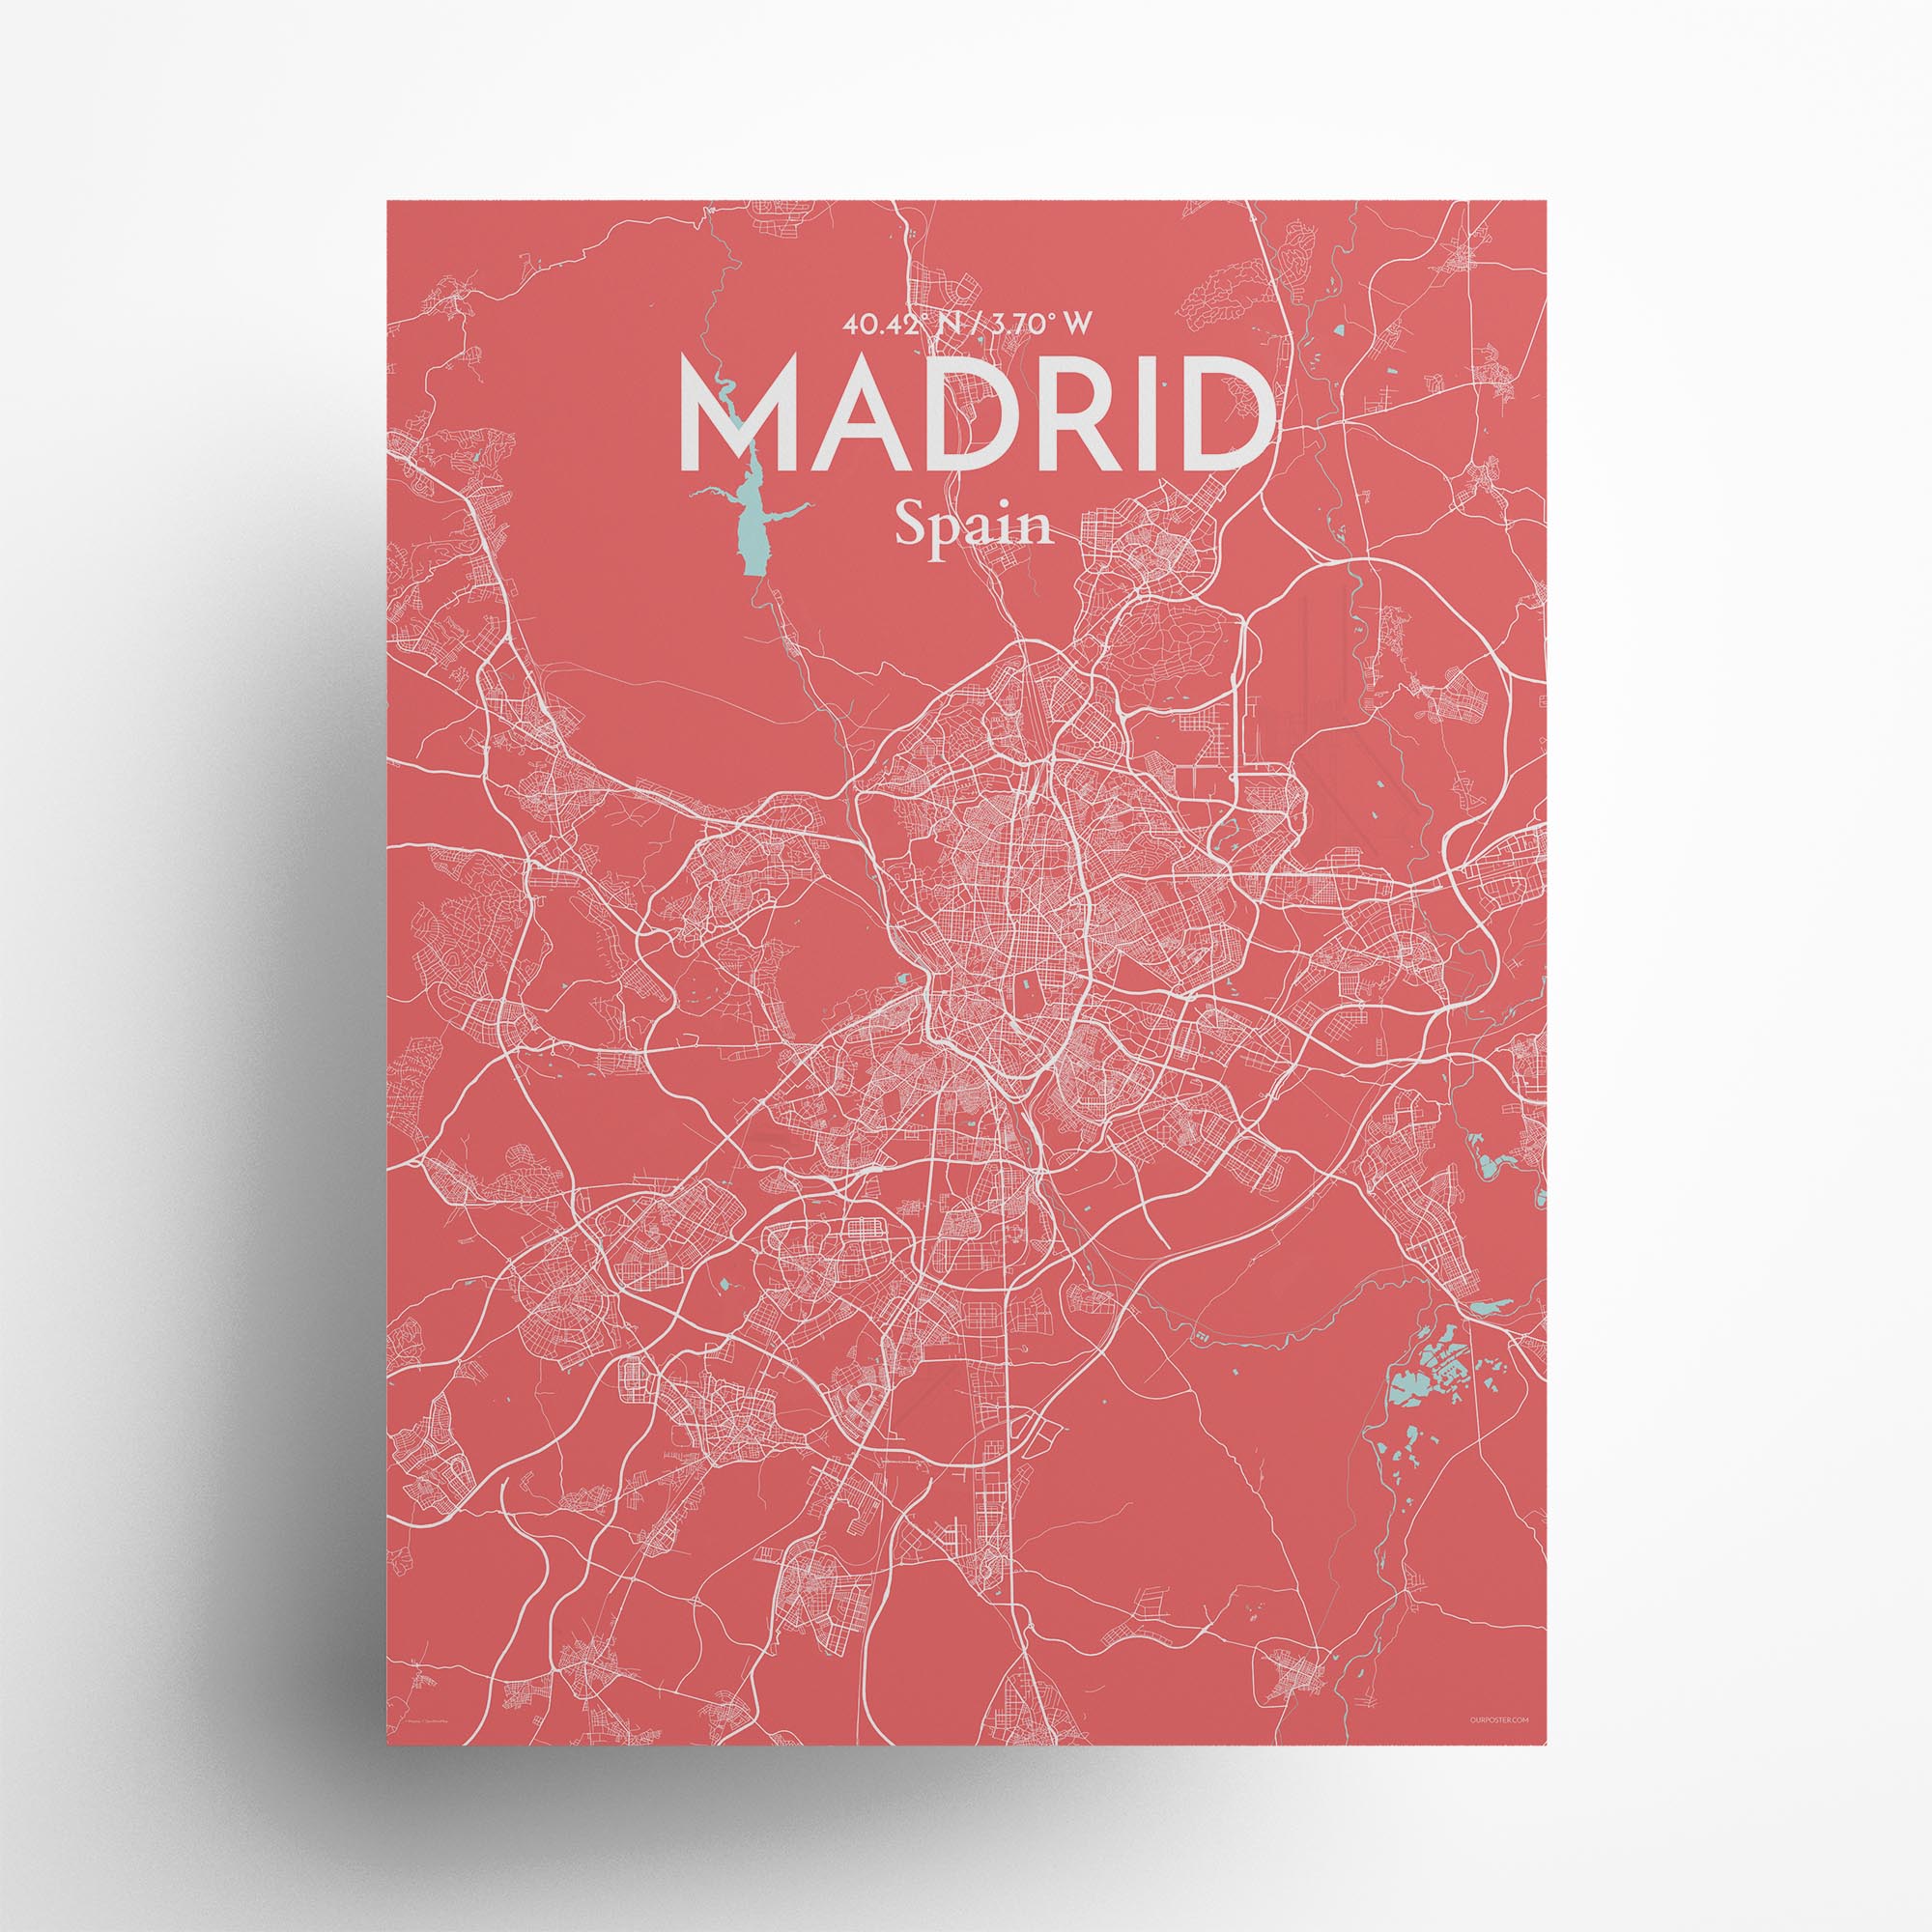 Madrid city map poster in Maritime of size 18" x 24"